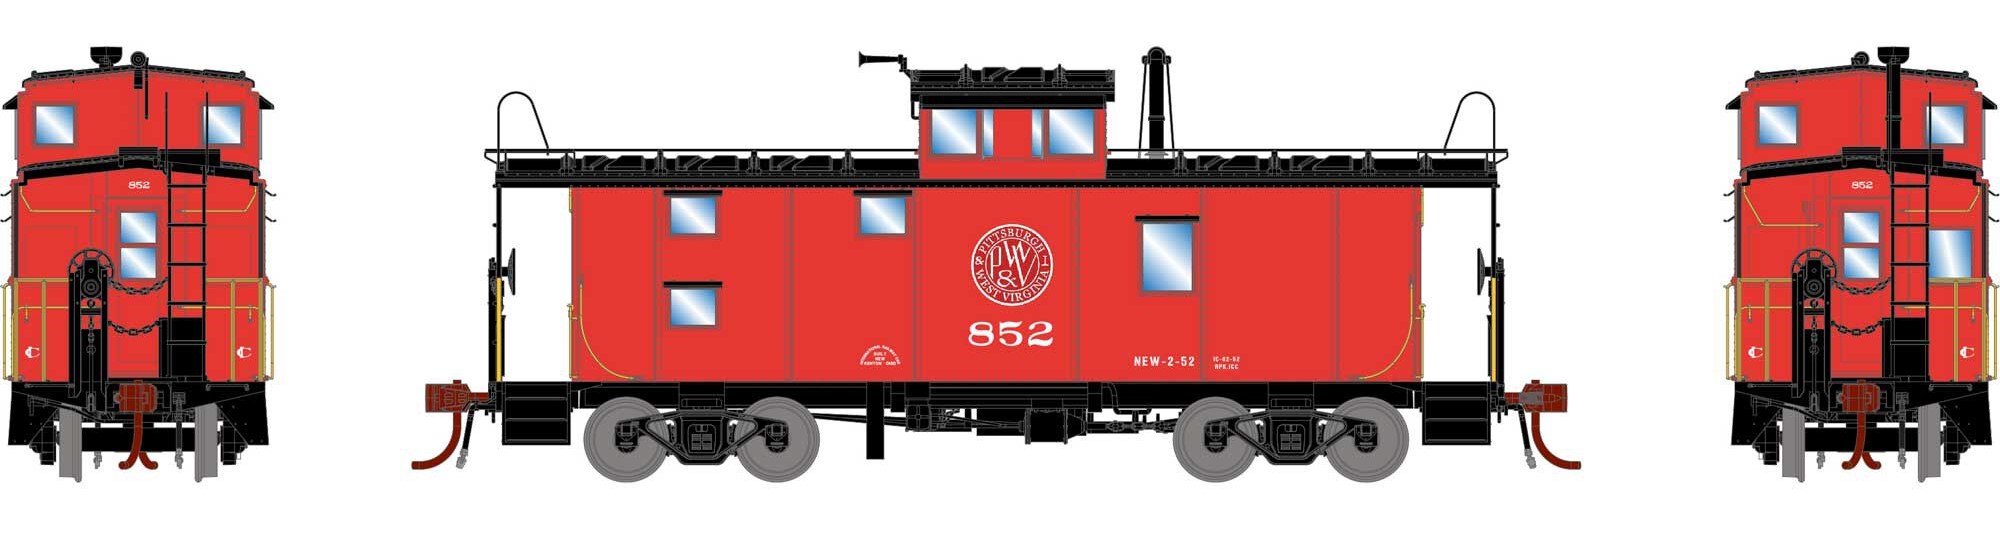 Athearn Genesis HO ATHG78586 DCC/NCE Decoder Equipped ICC Caboose with Lights Pittsburgh & West Virginia P&WV #852